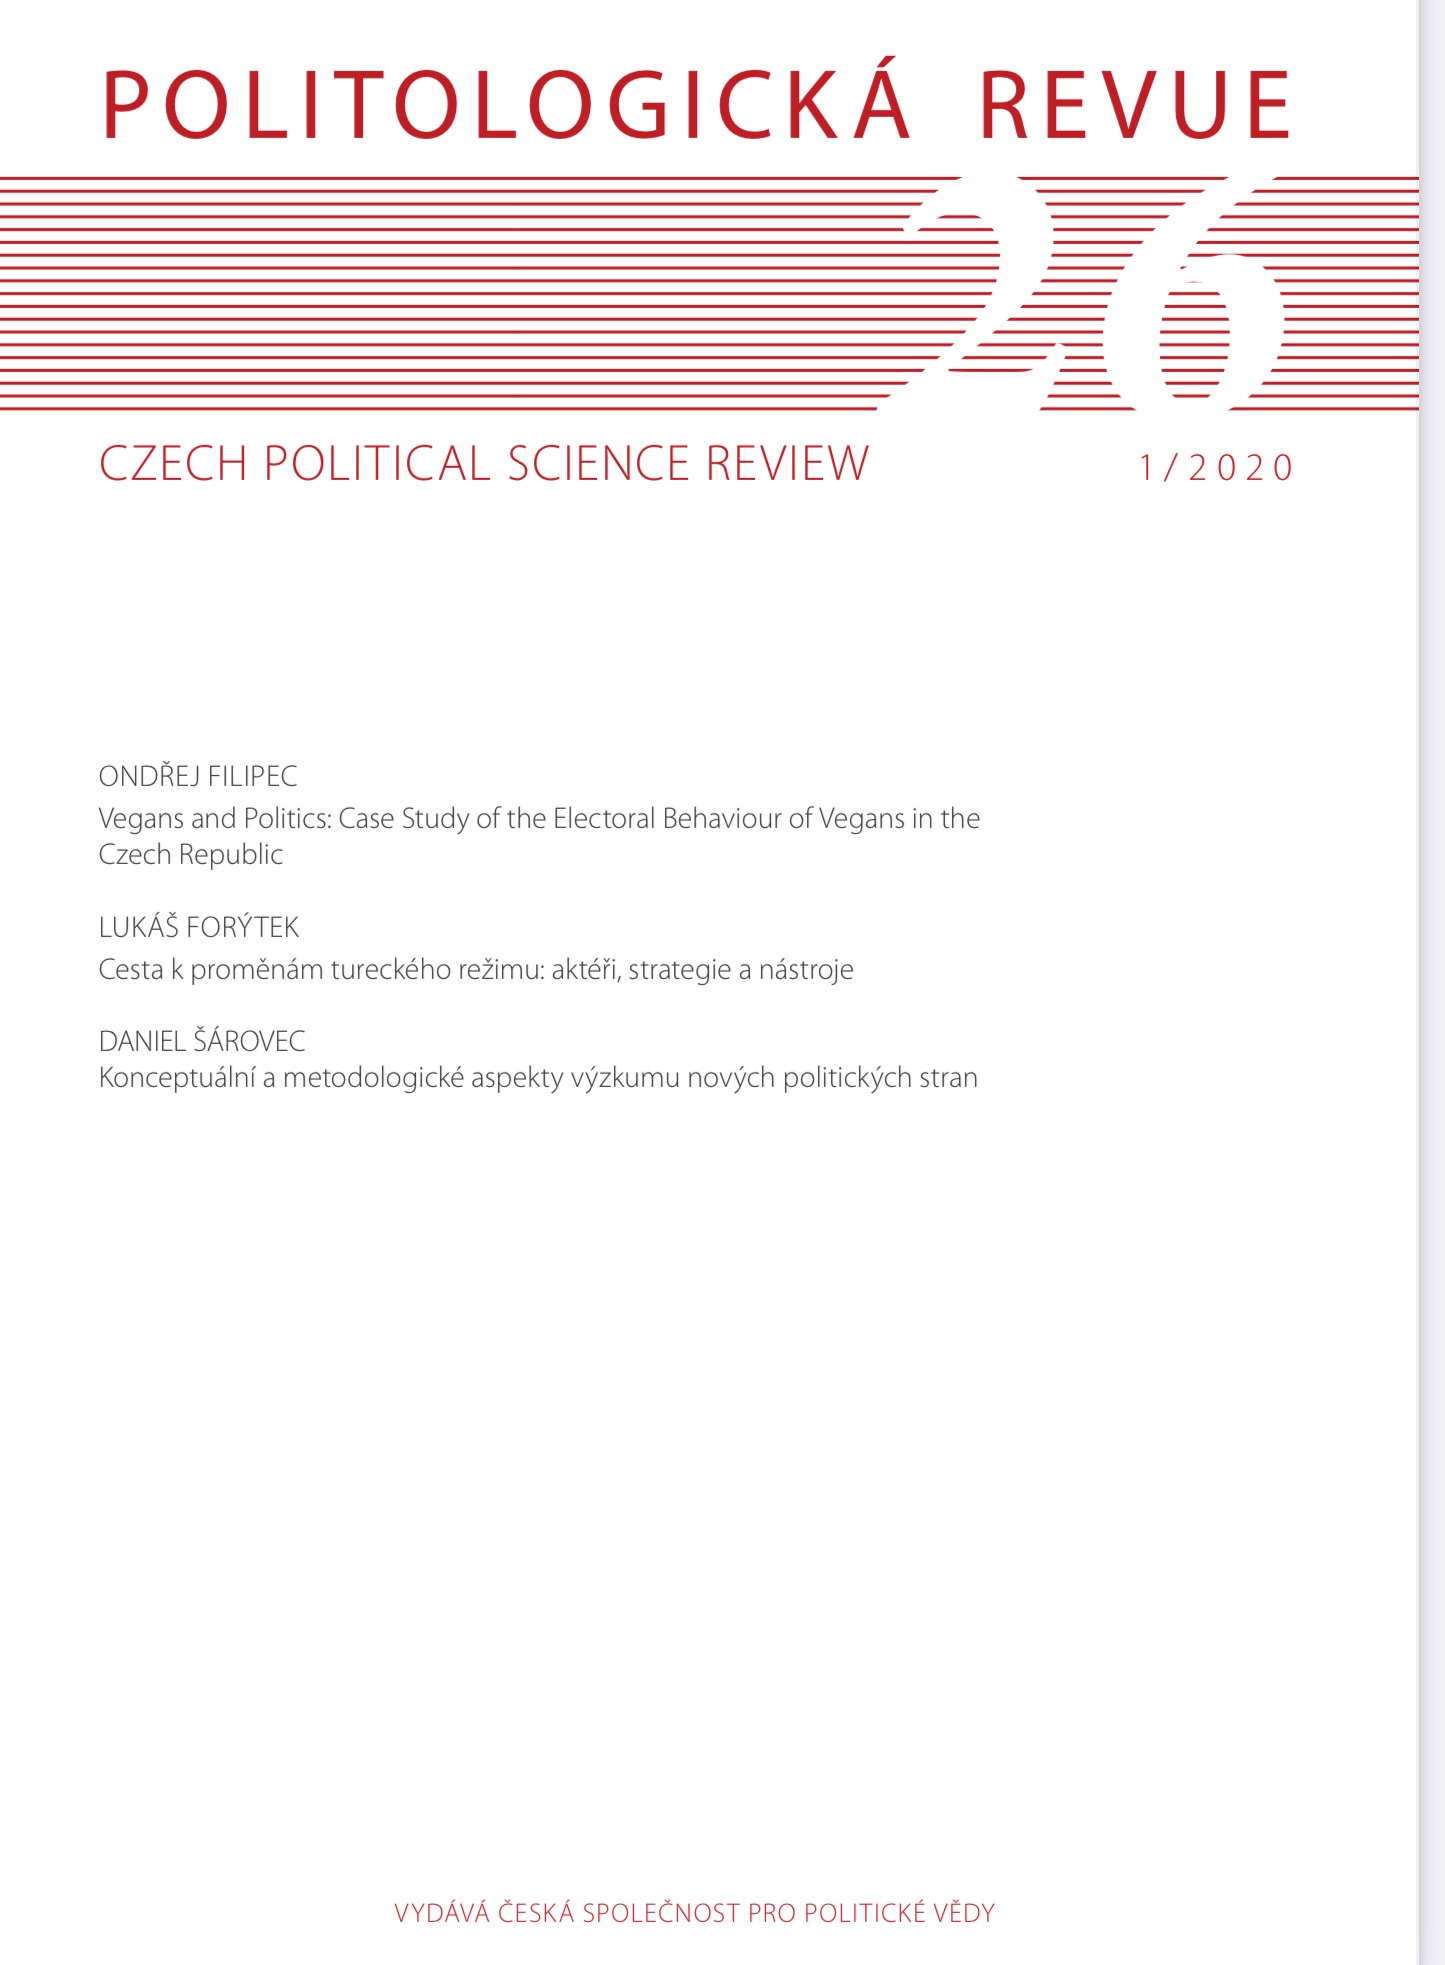 Conceptual and Methodological Aspects of New Political Parties’ Research Cover Image